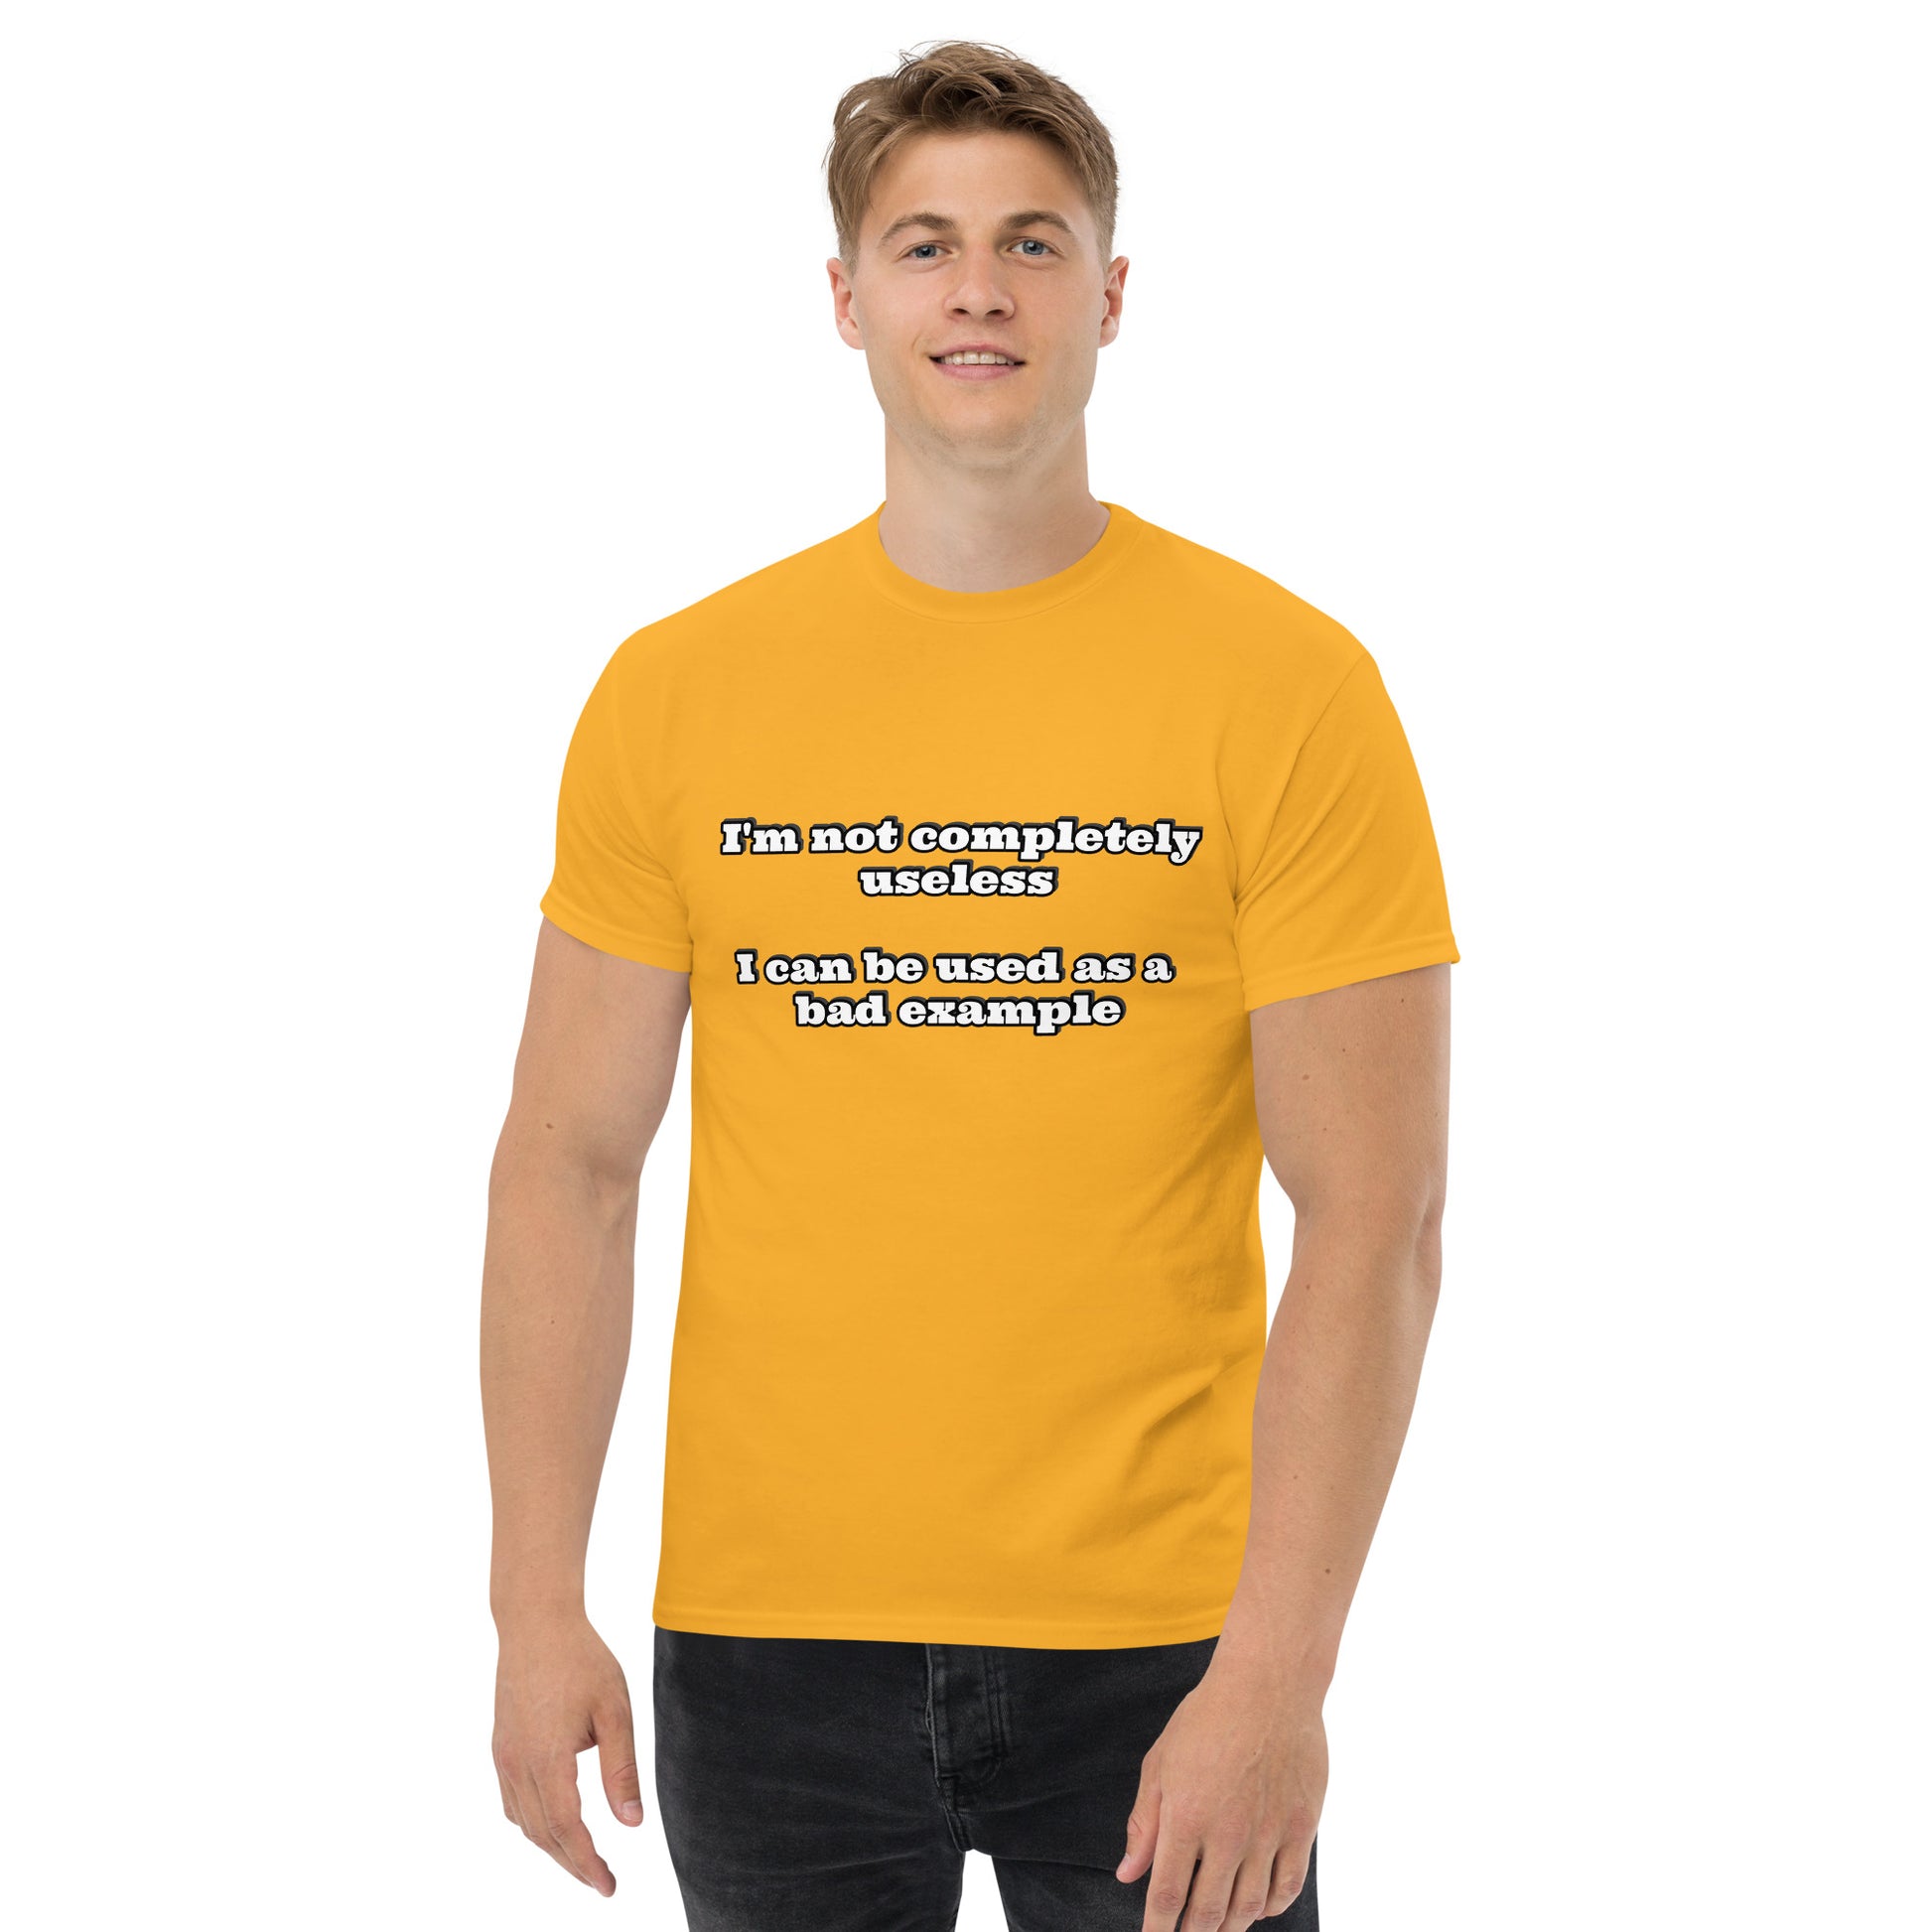 Men with gold t-shirt with text “I'm not completely useless I can be used as a bad example”